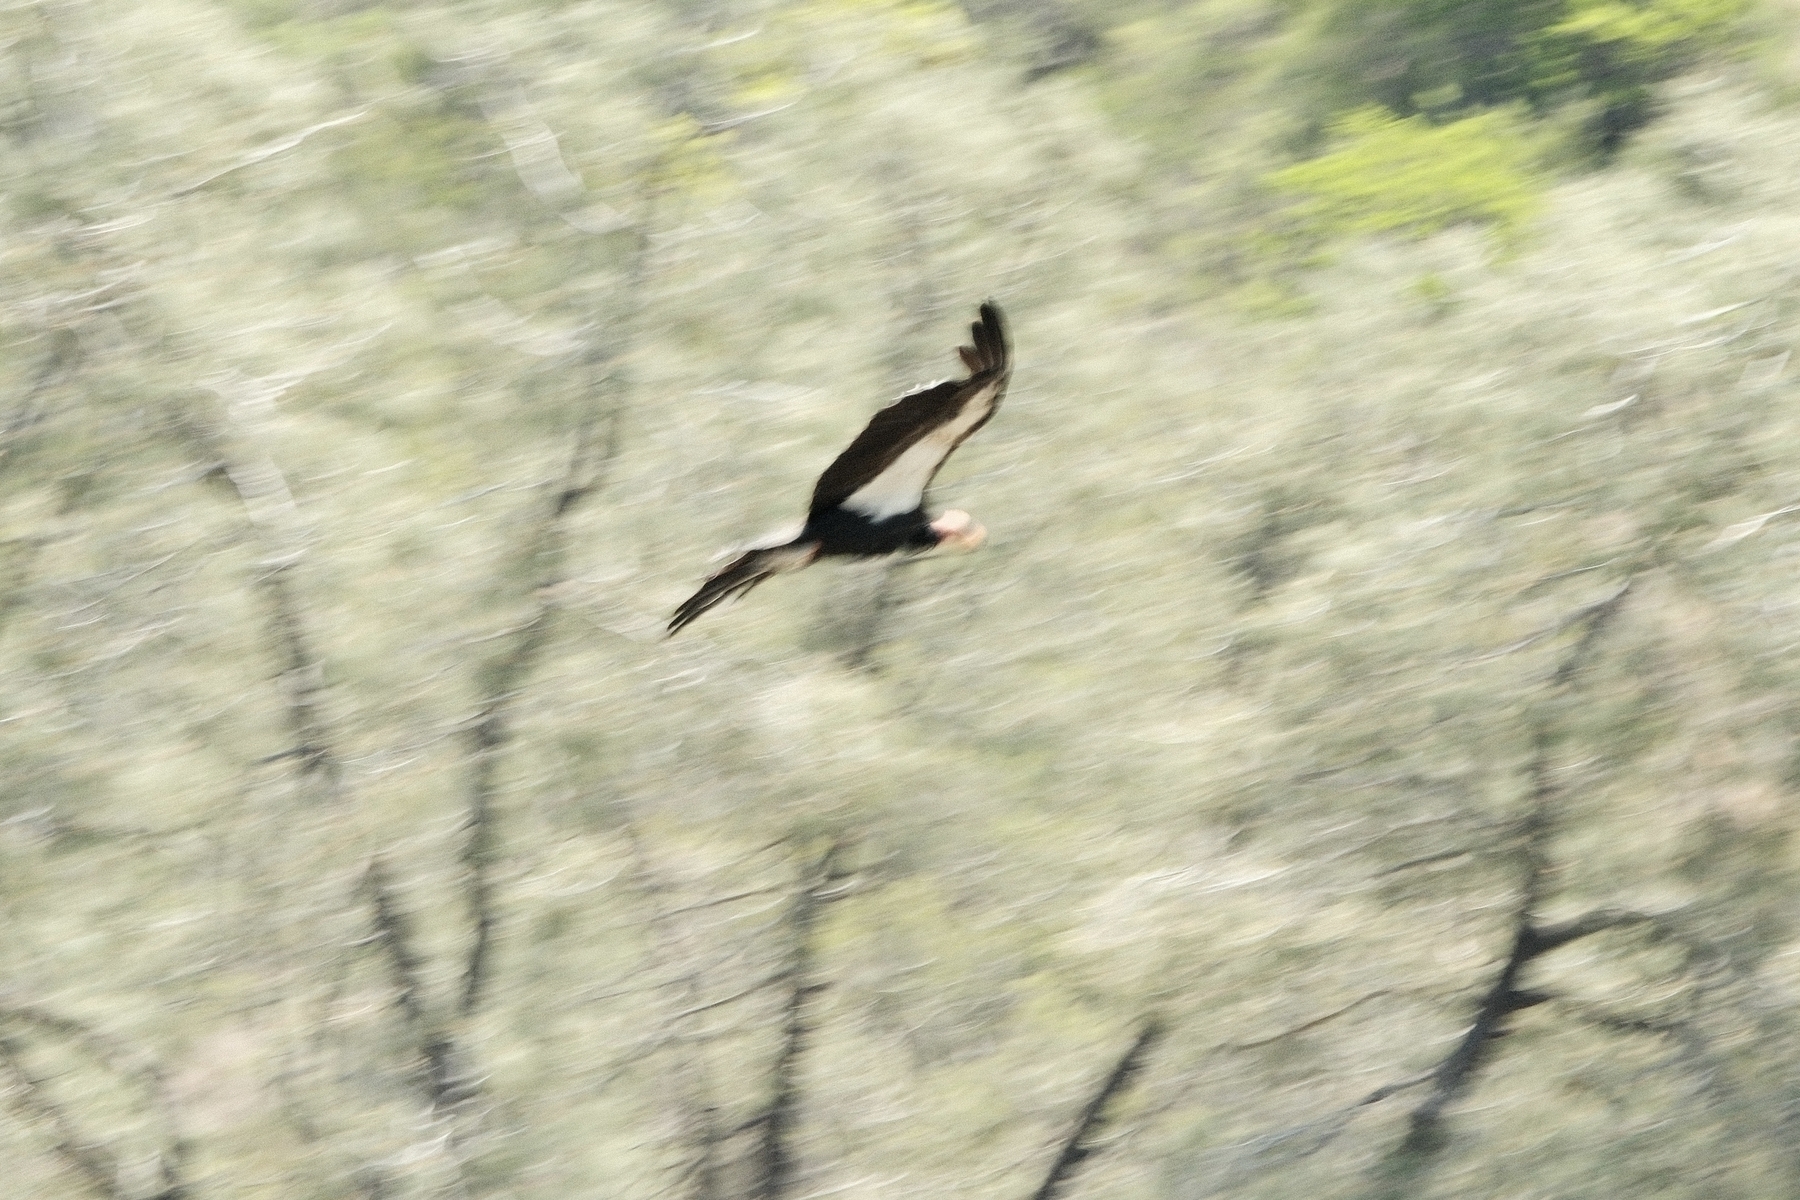 A California Condor showing it’s brown body, the underside of its half brown, half white wings, and it’s naked neck and head. The background is a blur of vegetation.